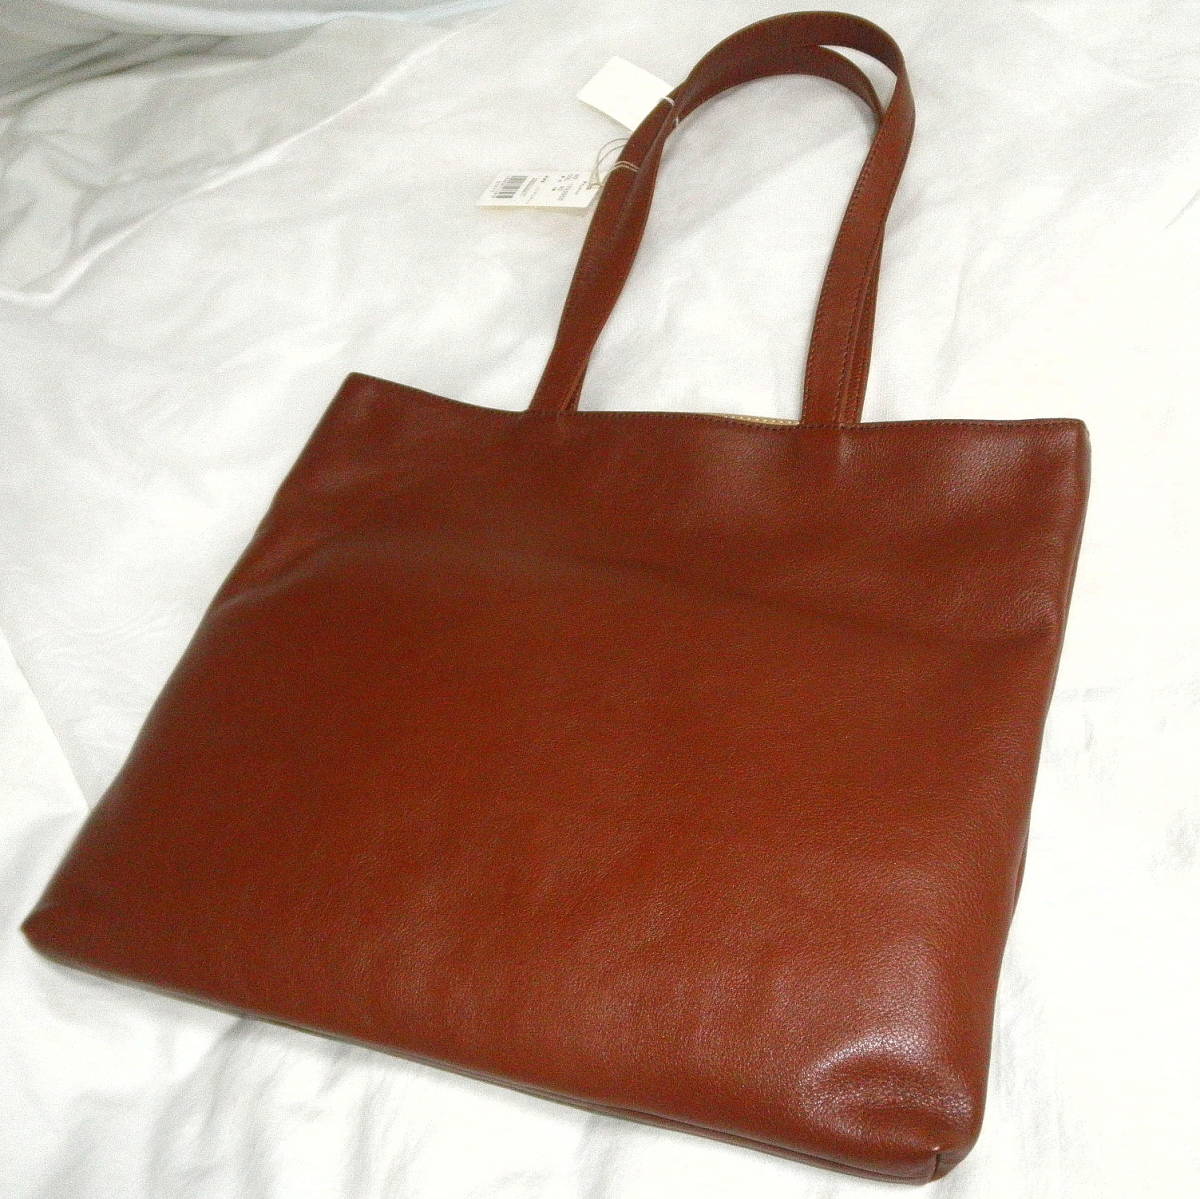  new goods Dakota dakota shoulder handbag tote bag mobile cow leather leather scorching tea type pushed . processing all leather tag attaching unused somewhat defect 